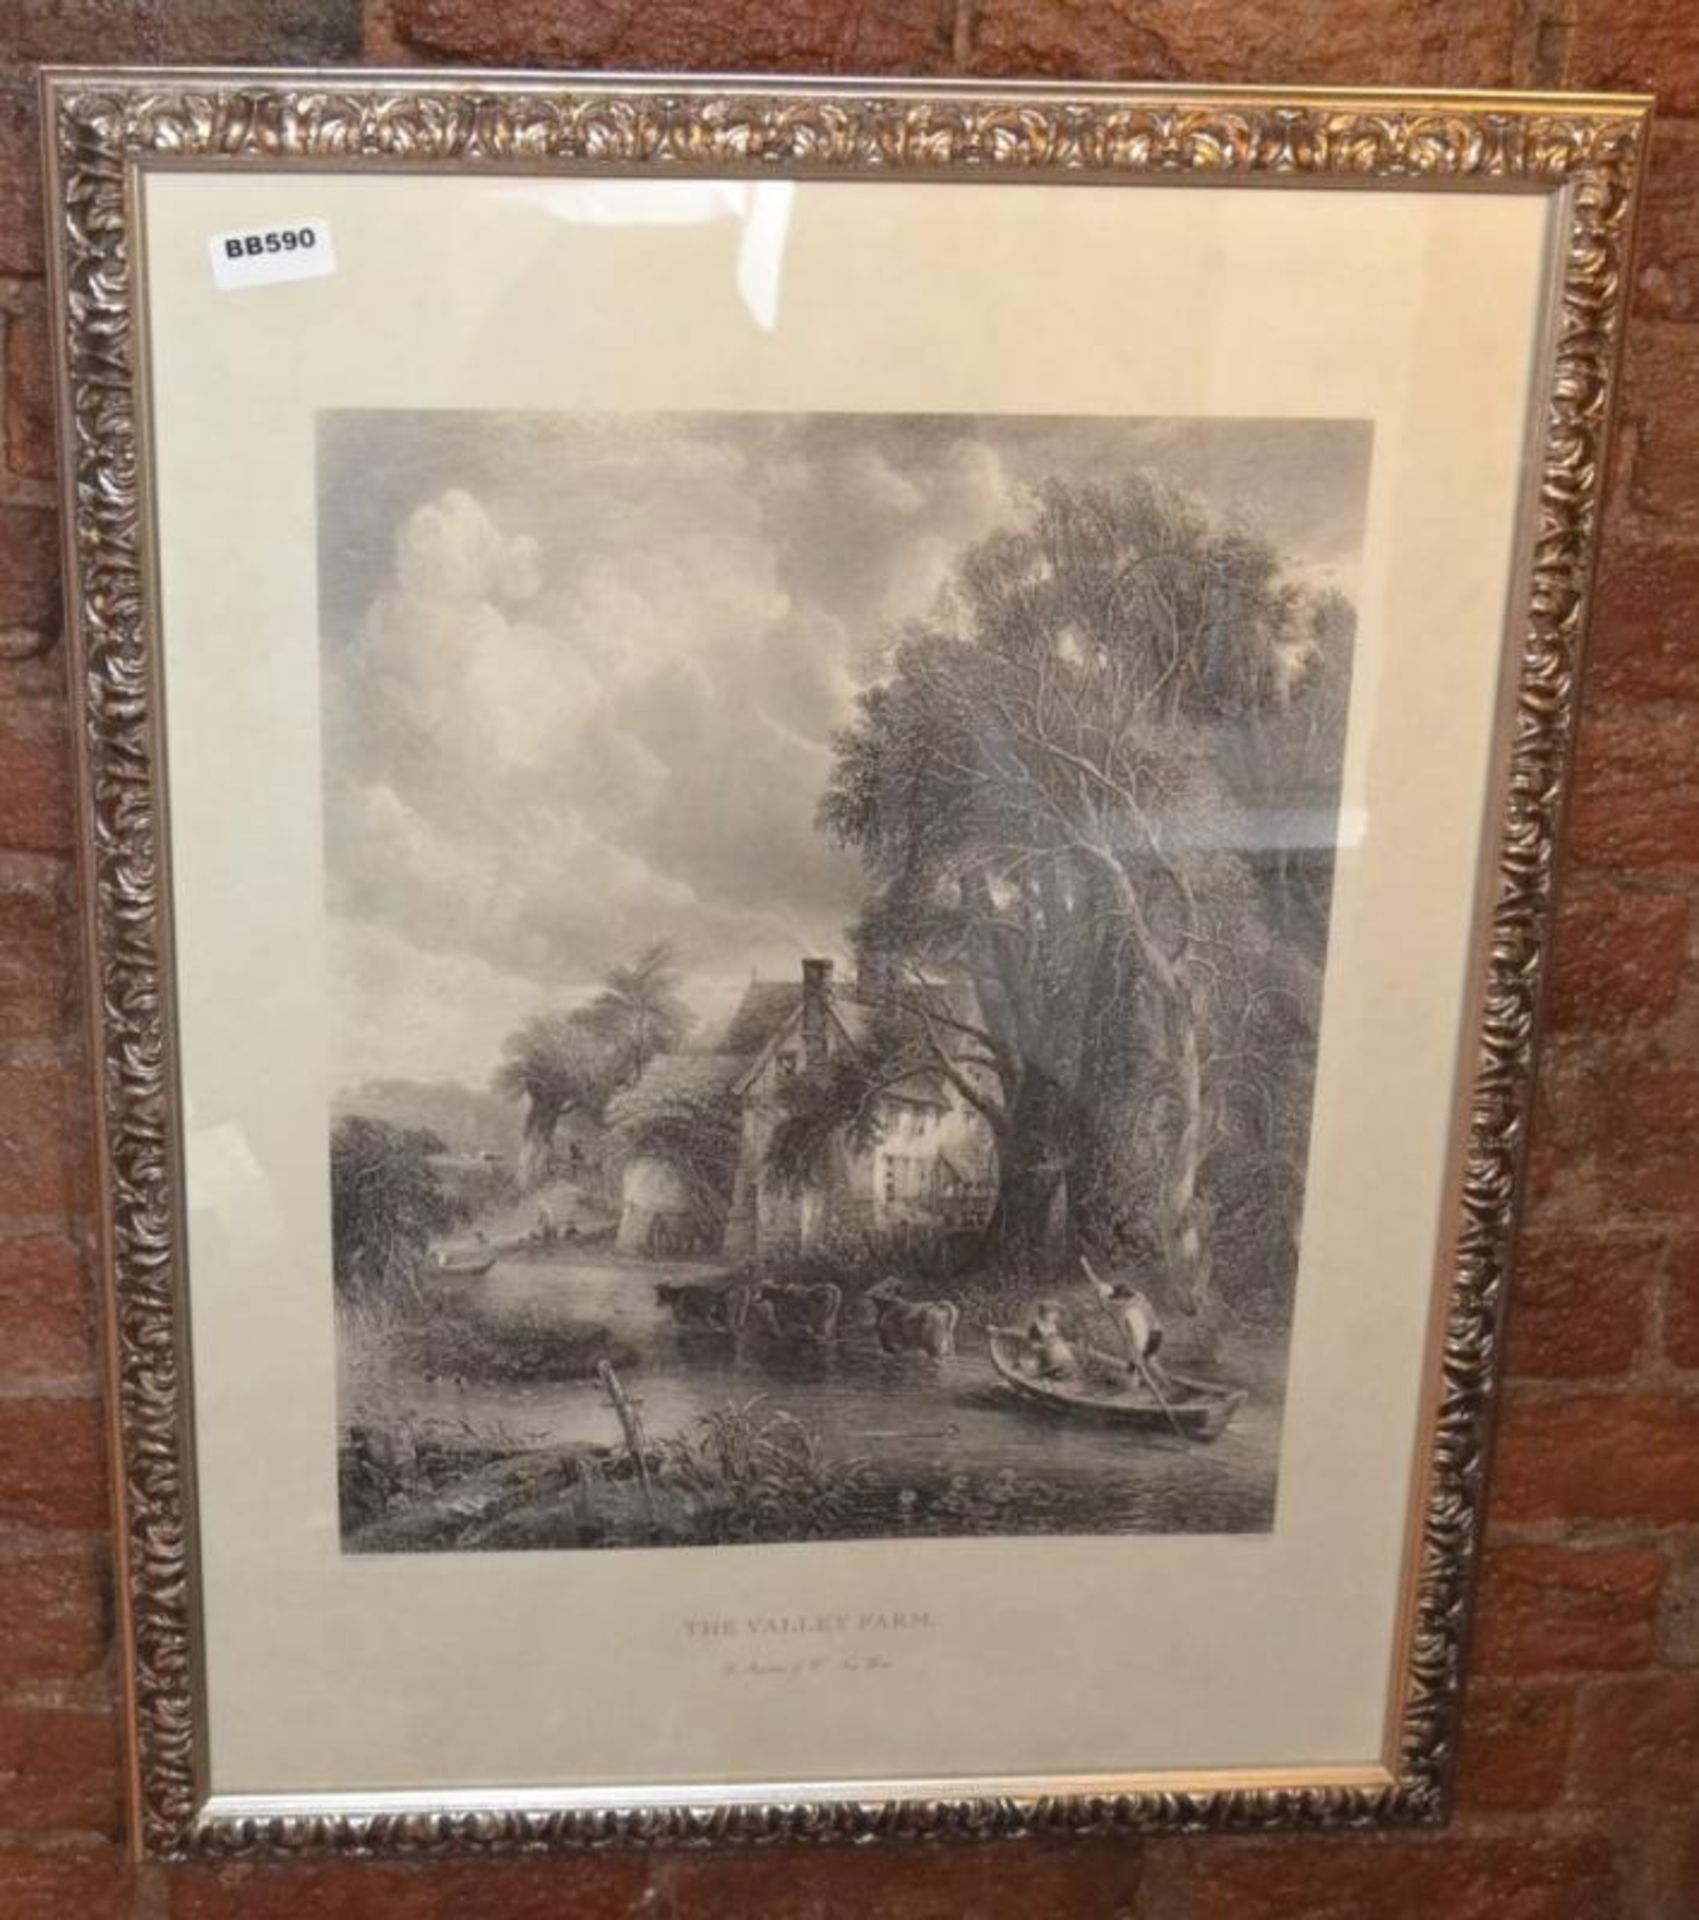 1 x Framed Picture THE VALLEY FARM By D Appleton & Co New York - 67 x 88 cms - Ref BB590 TFF - CL351